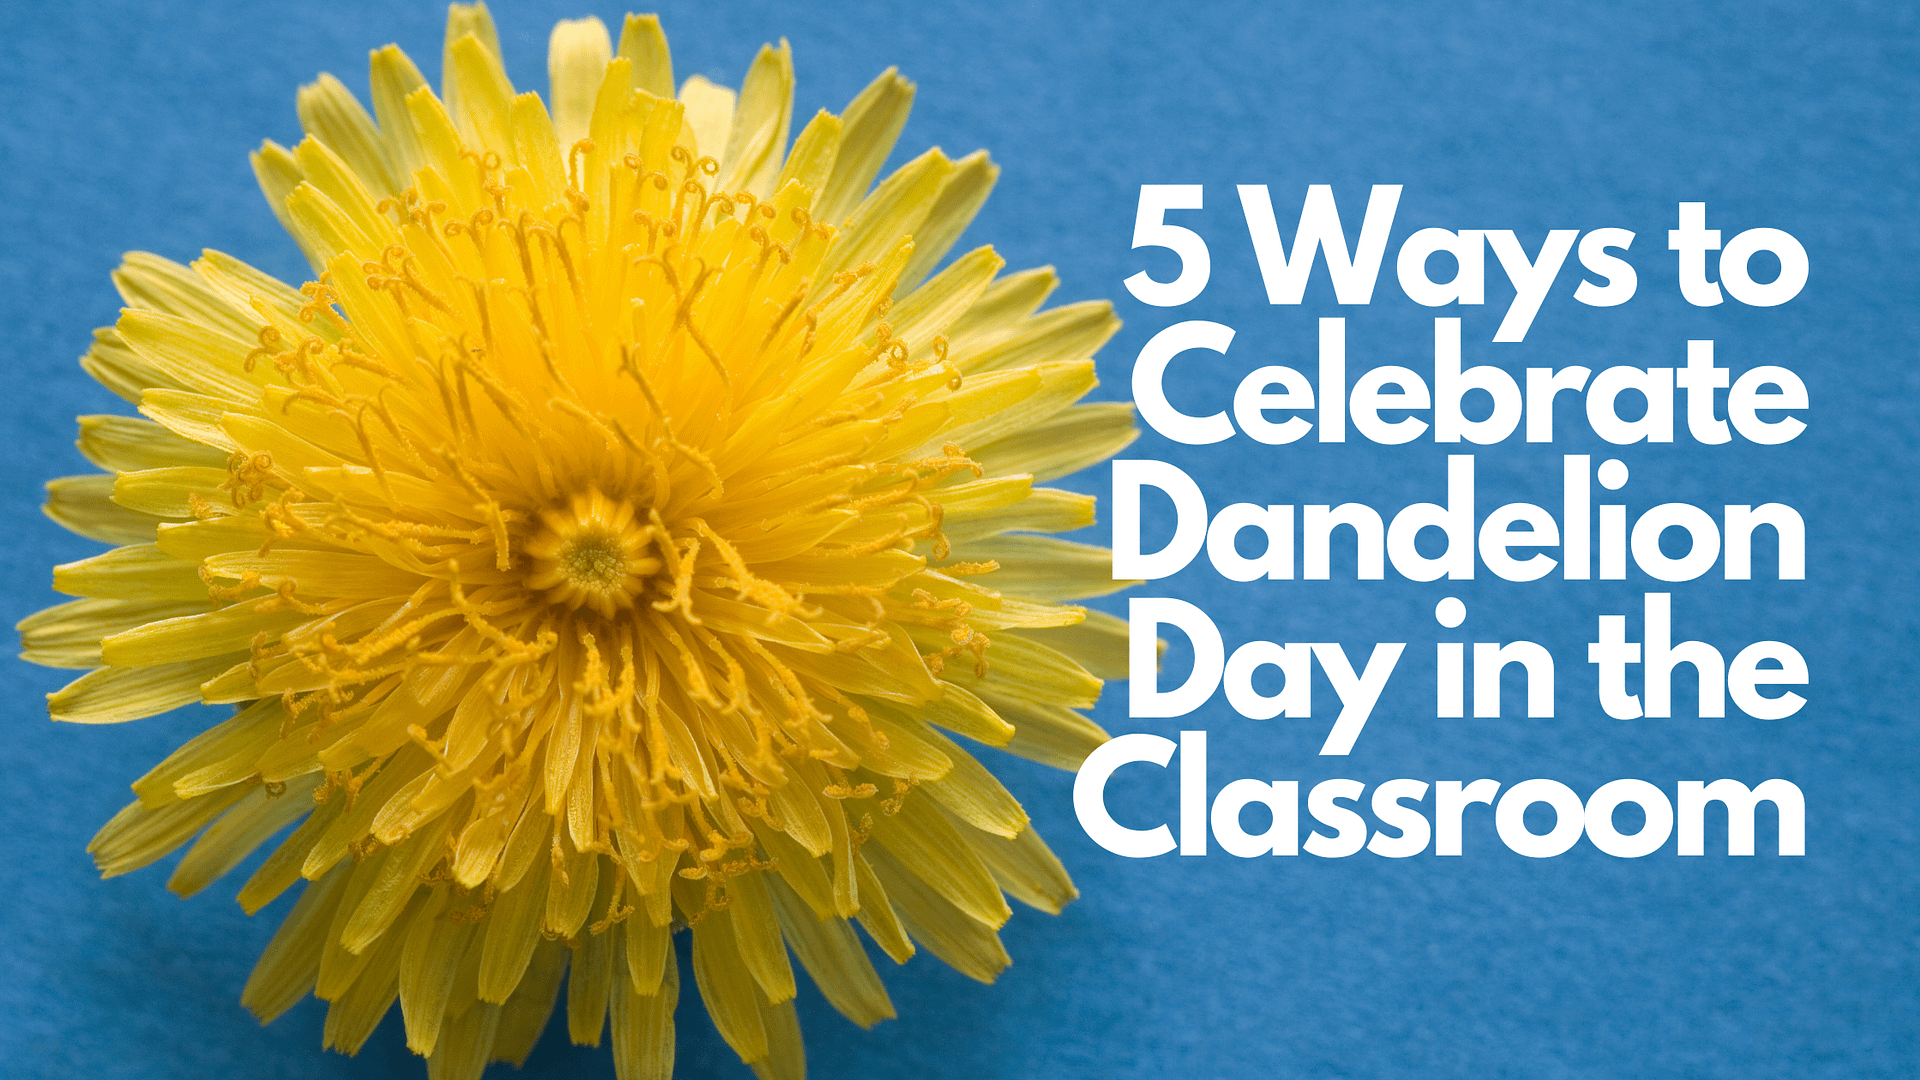 5 Ways to Celebrate Dandelion Day in your Classroom